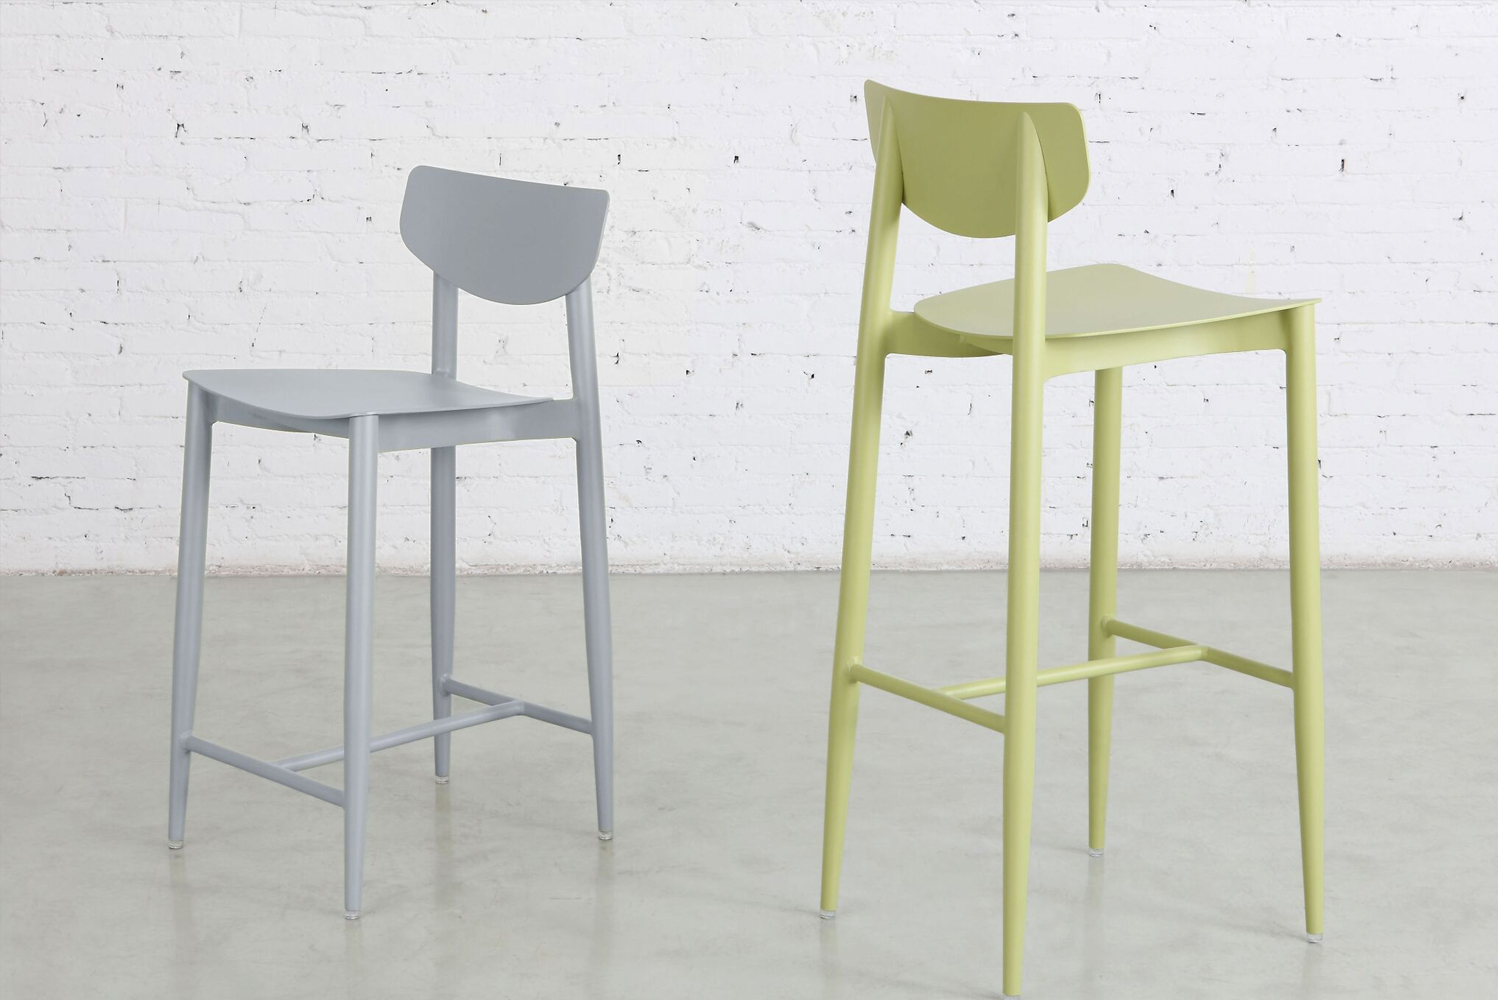 mad furniture design launched the Ally collection of counter-height stools and chairs